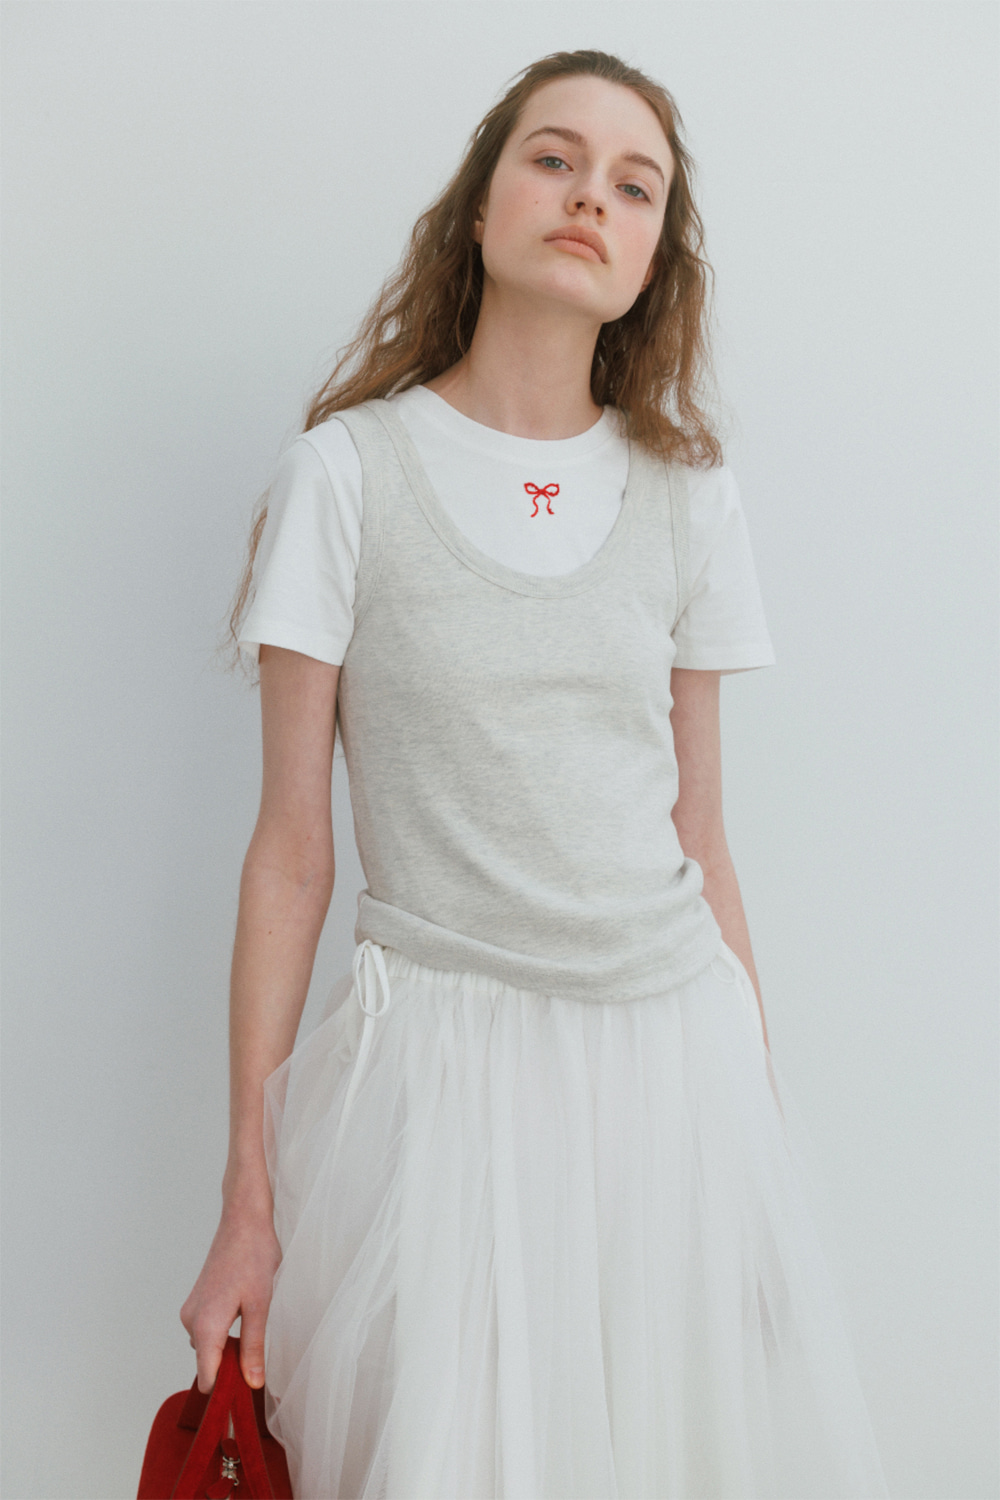 [2 REORDER] Embroidery Beads Tee in White (4/25일 예약배송)